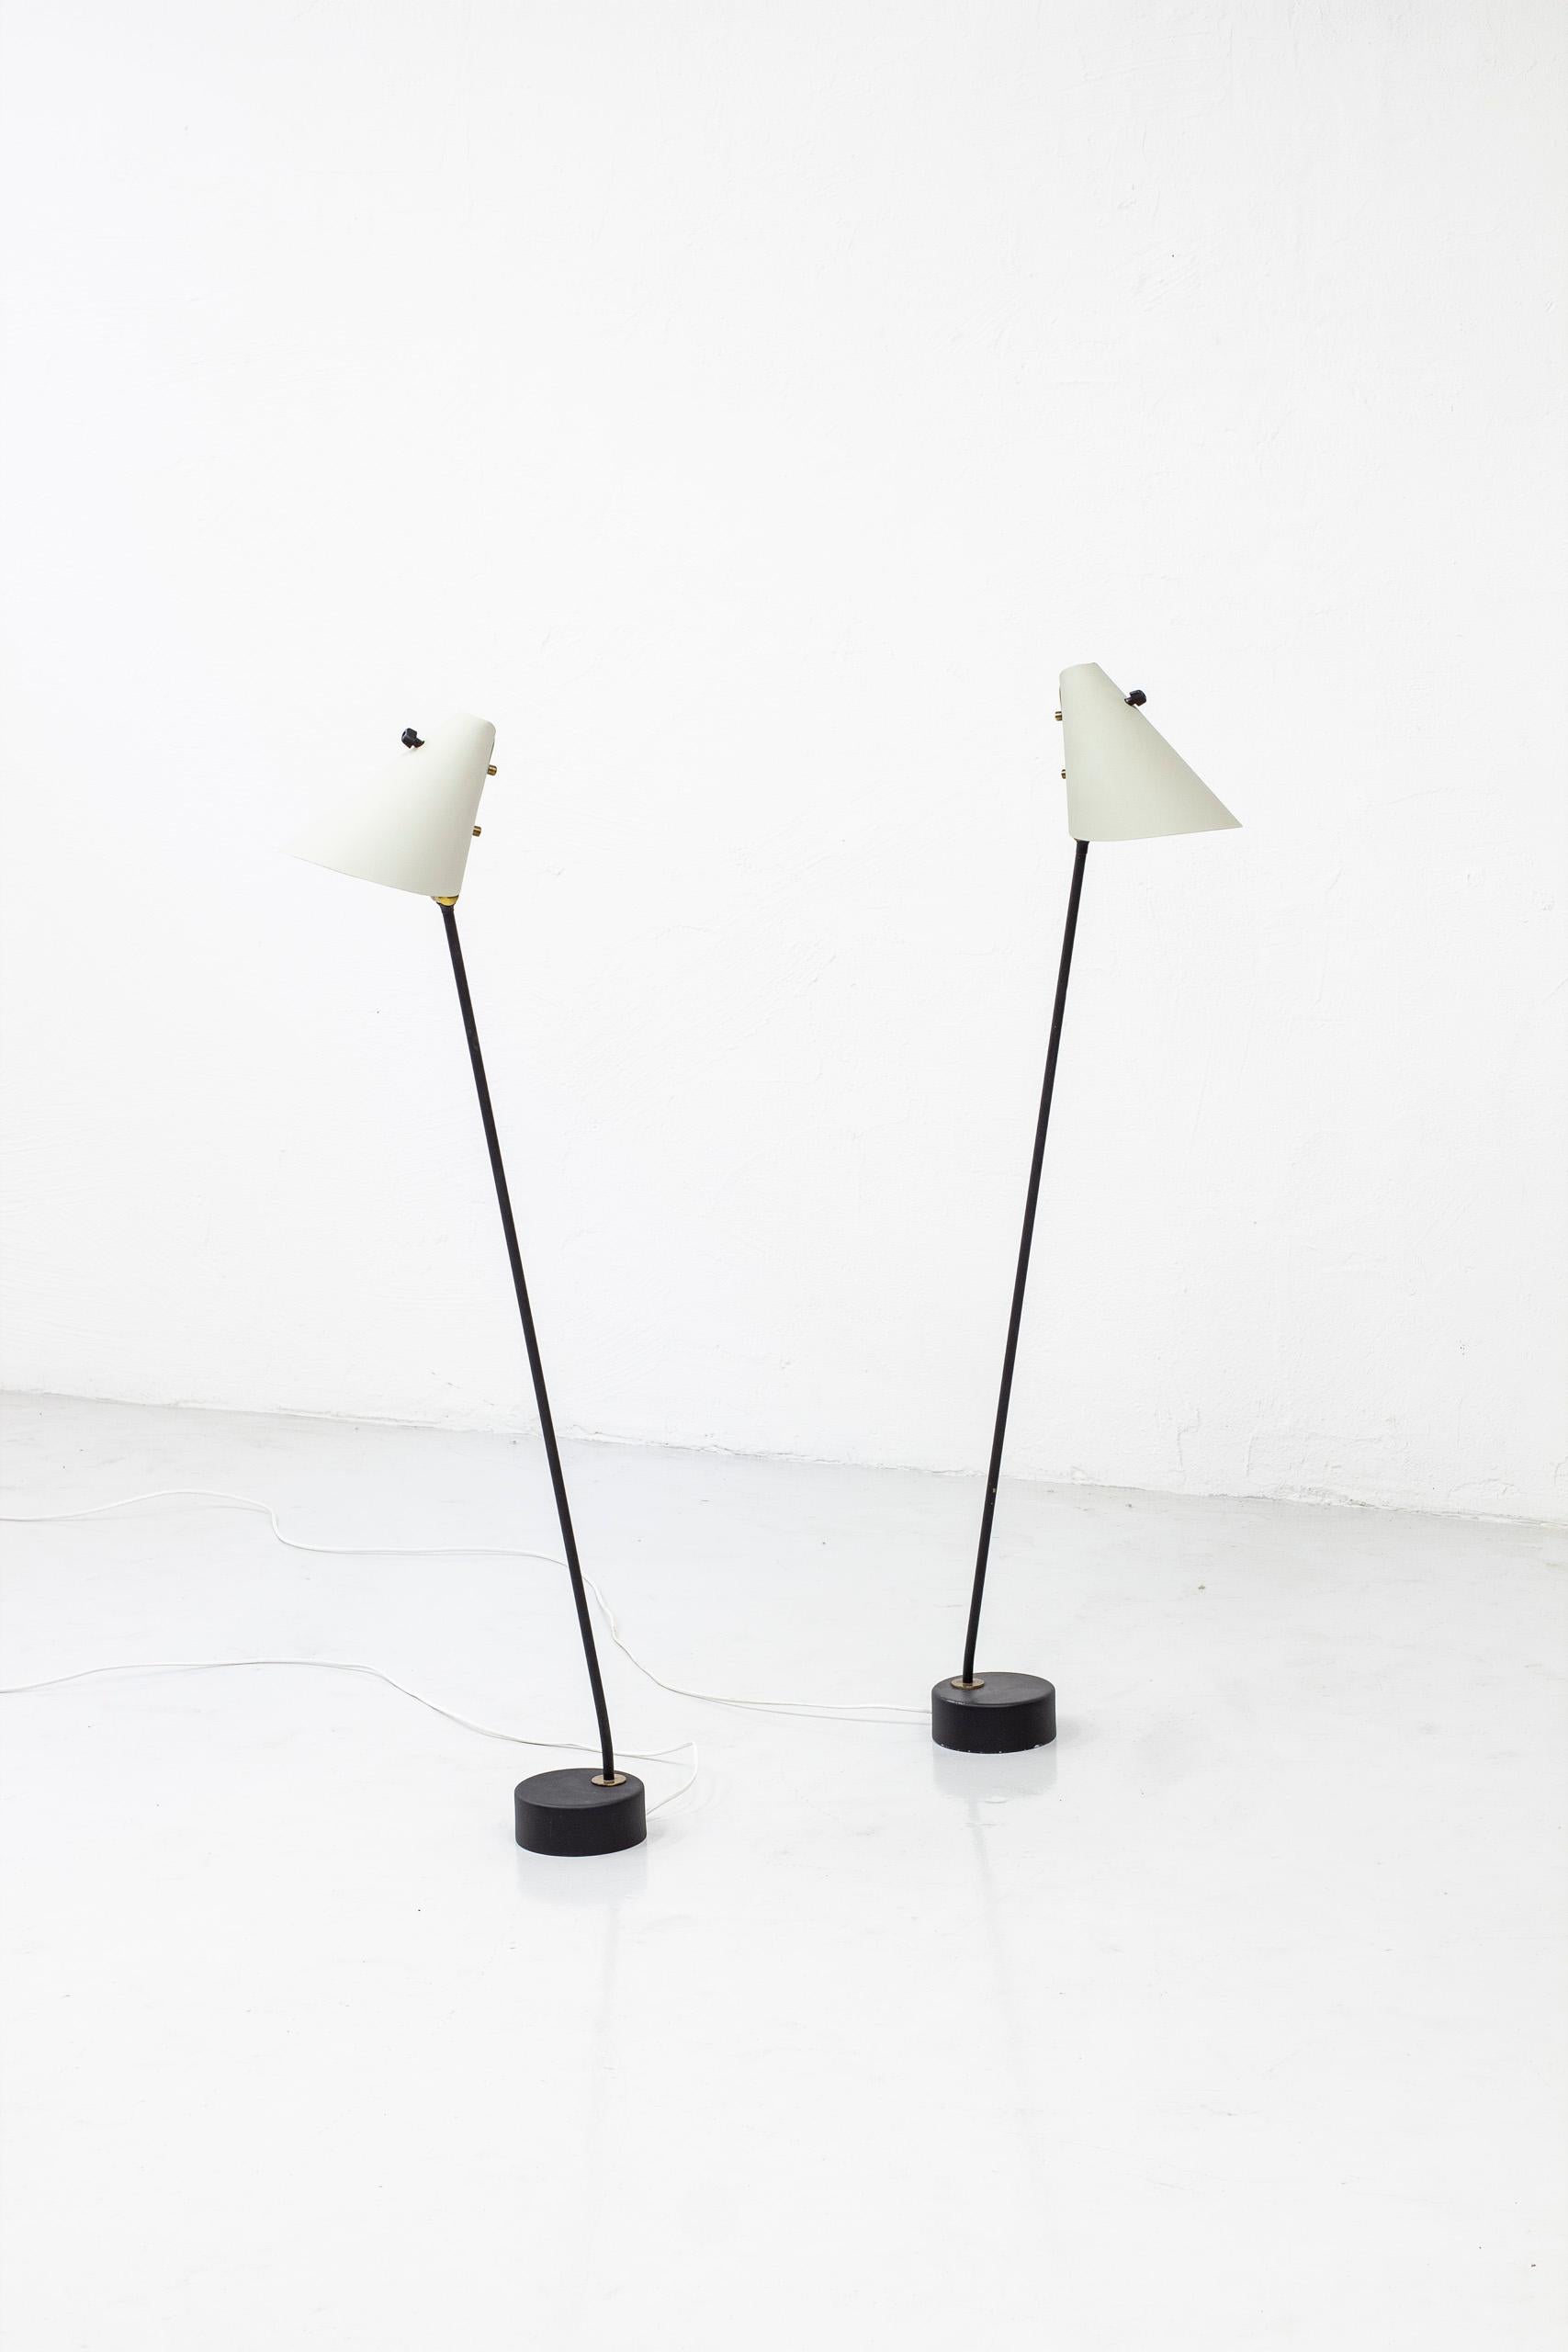 Rare floor lamps designed by Hans Agne Jakobsson and Arne Nilsson. Produced during the 1950s by Hans Agne Jakobsson AB in Sweden. Mad from lacquered metal in black and grey with brass details and Bakelite light switch. Original light switches on the